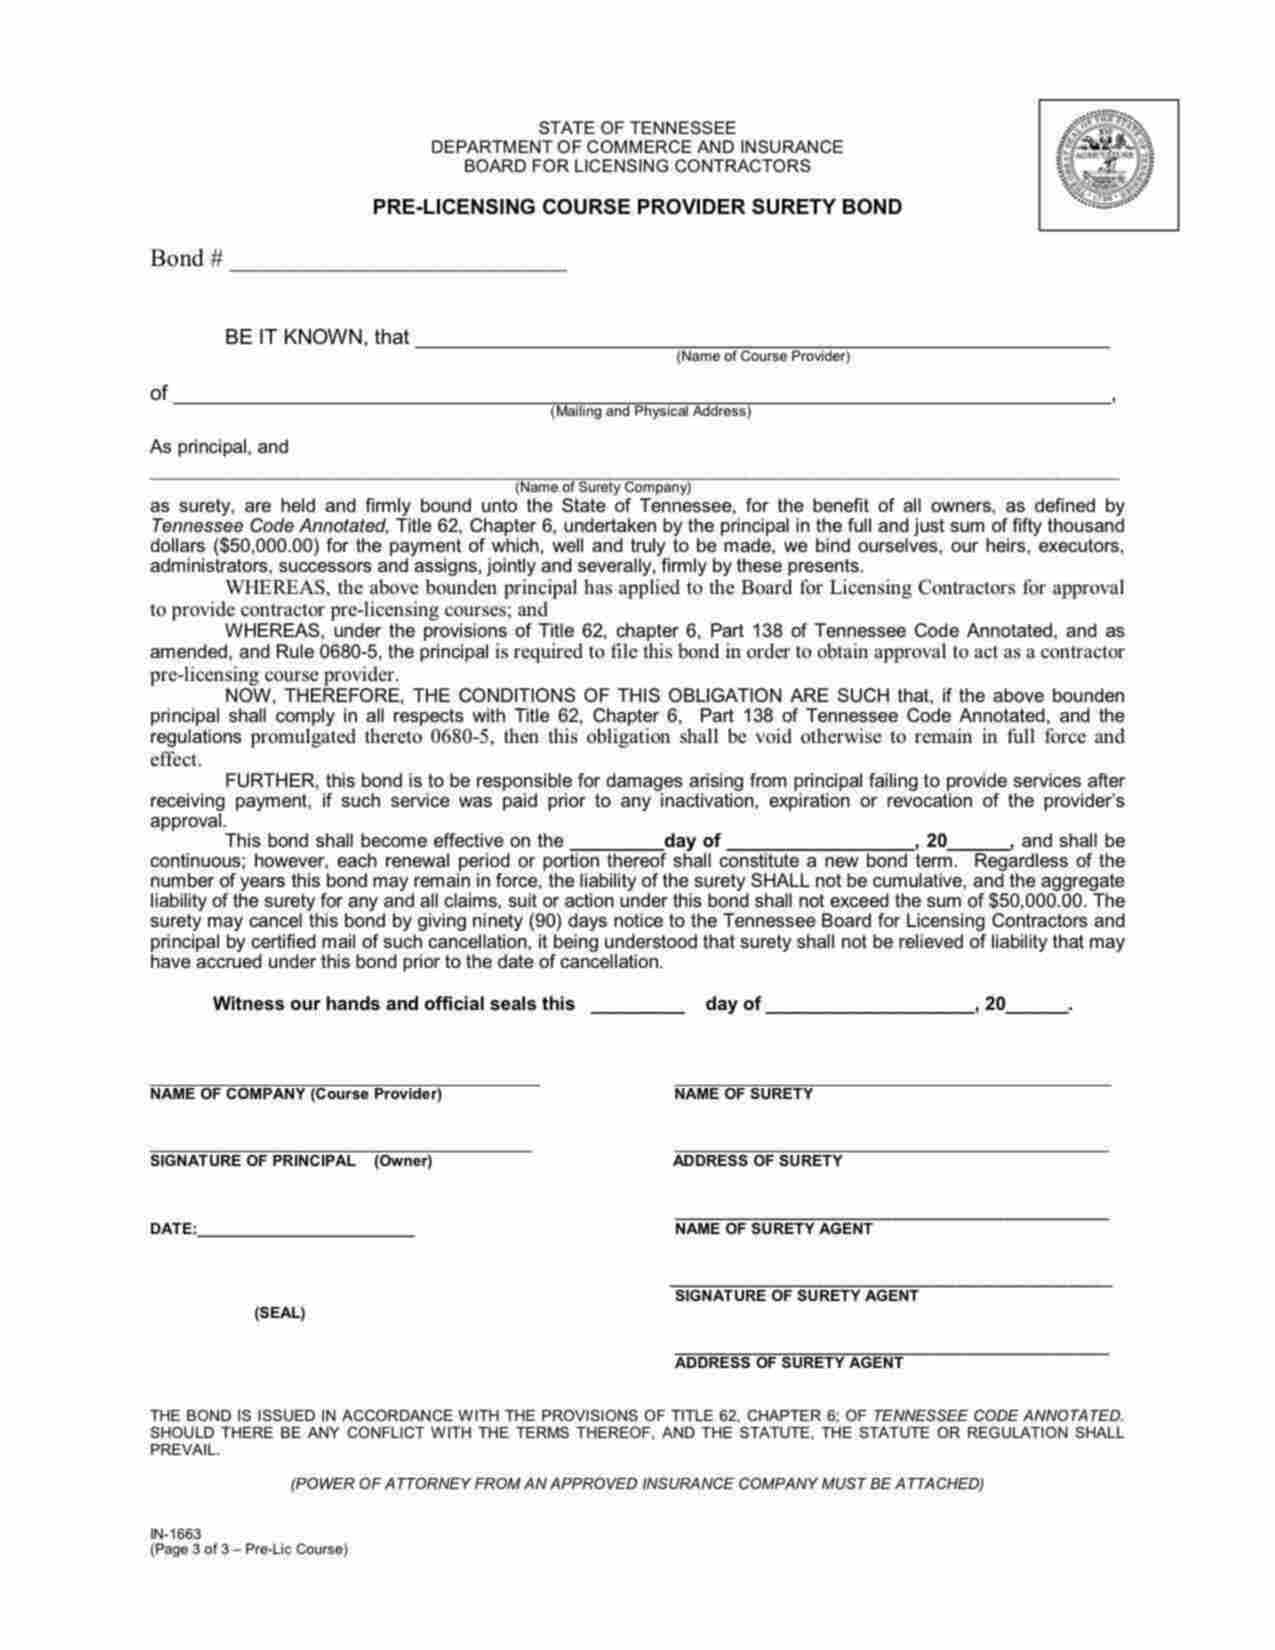 Tennessee Pre-Licensing Course Provider Bond Form